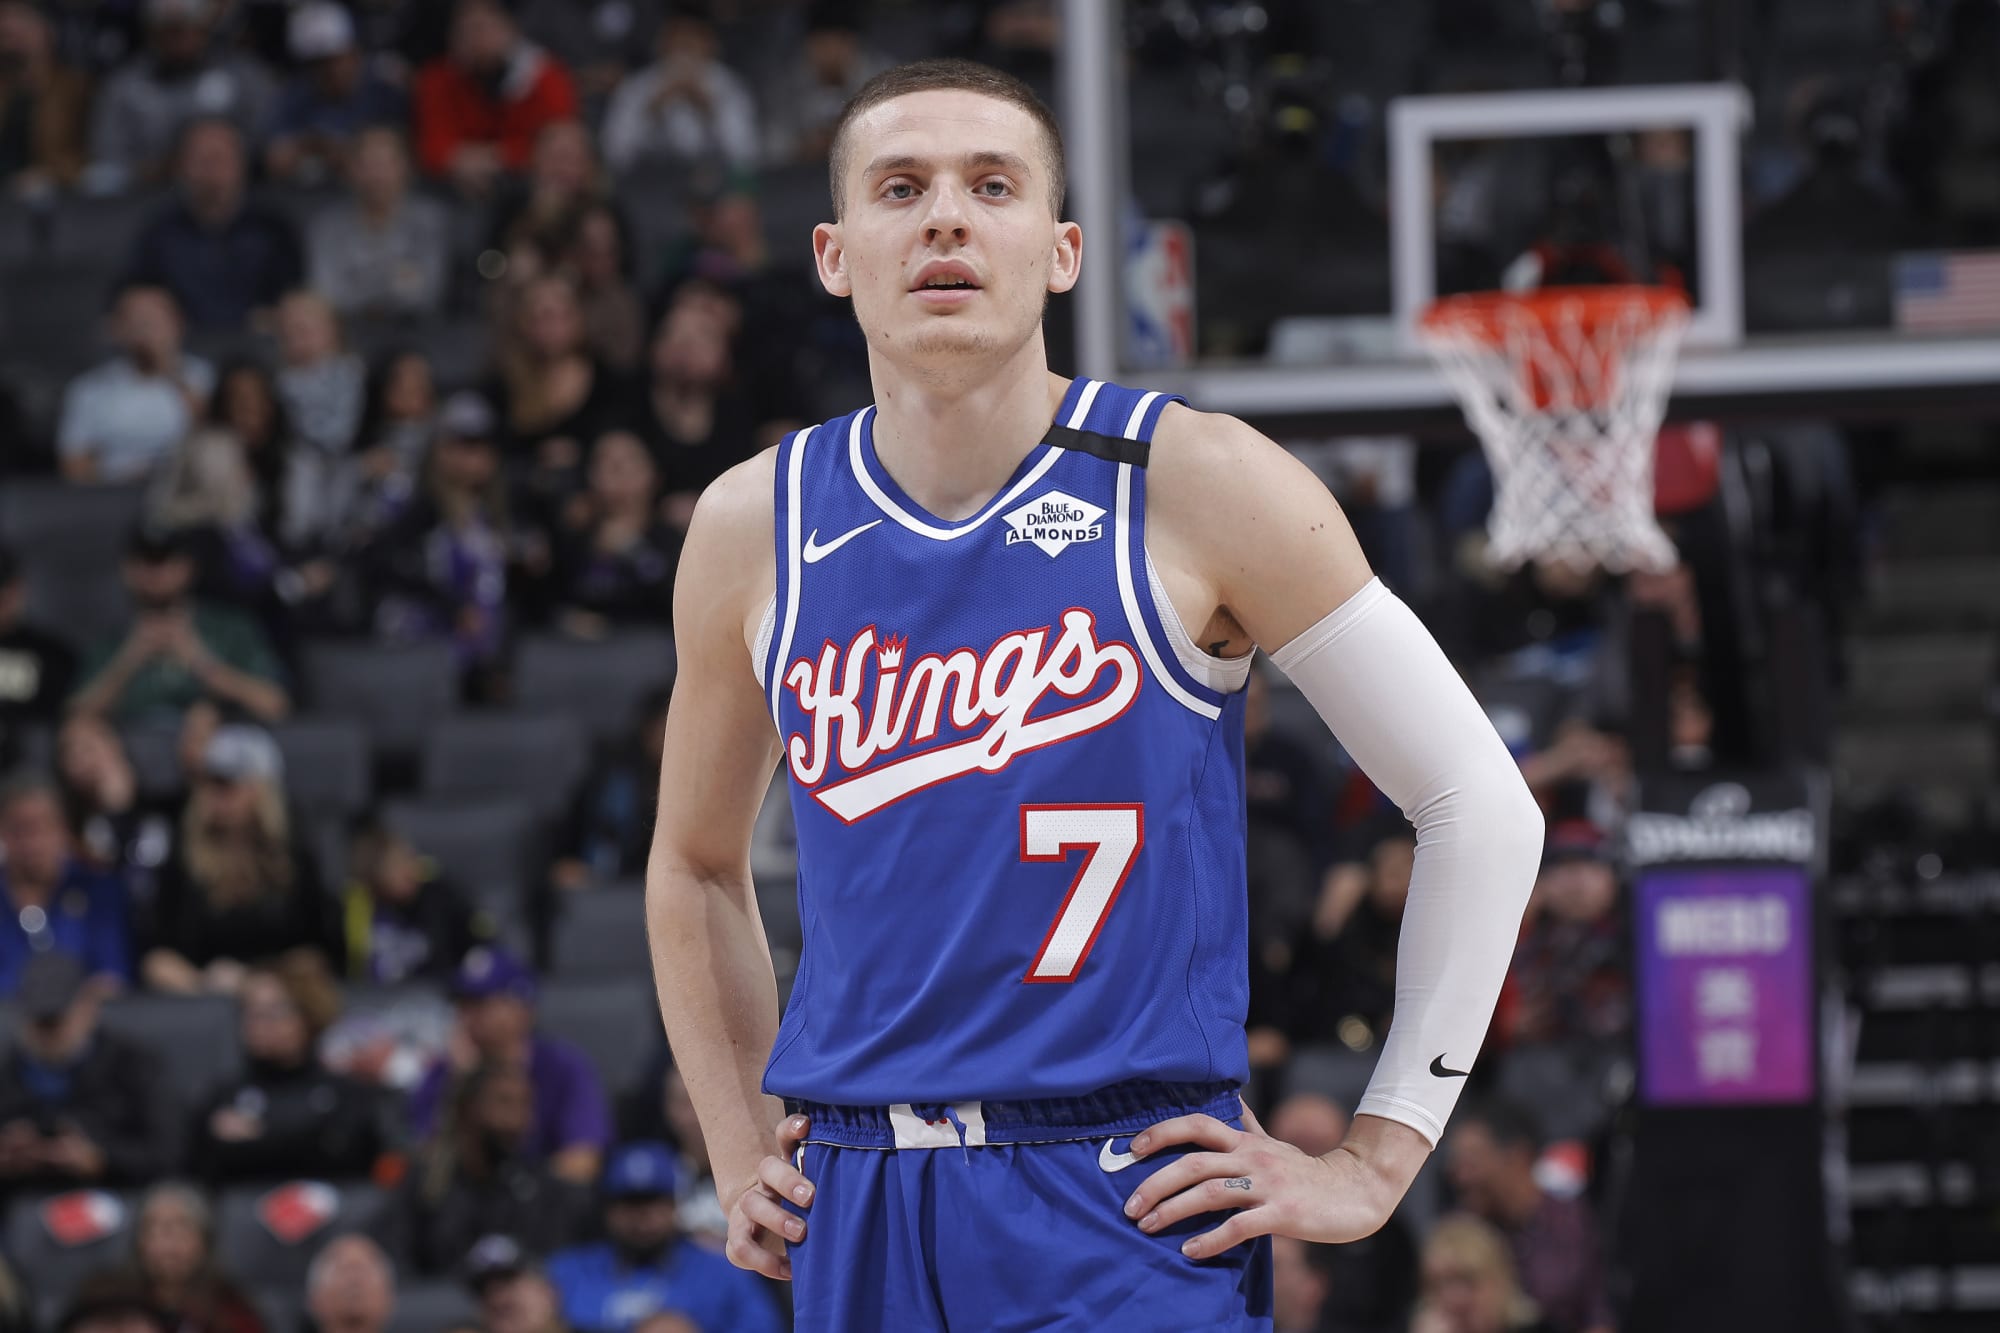 Already a national champion, Kyle Guy is ready if Kings call his